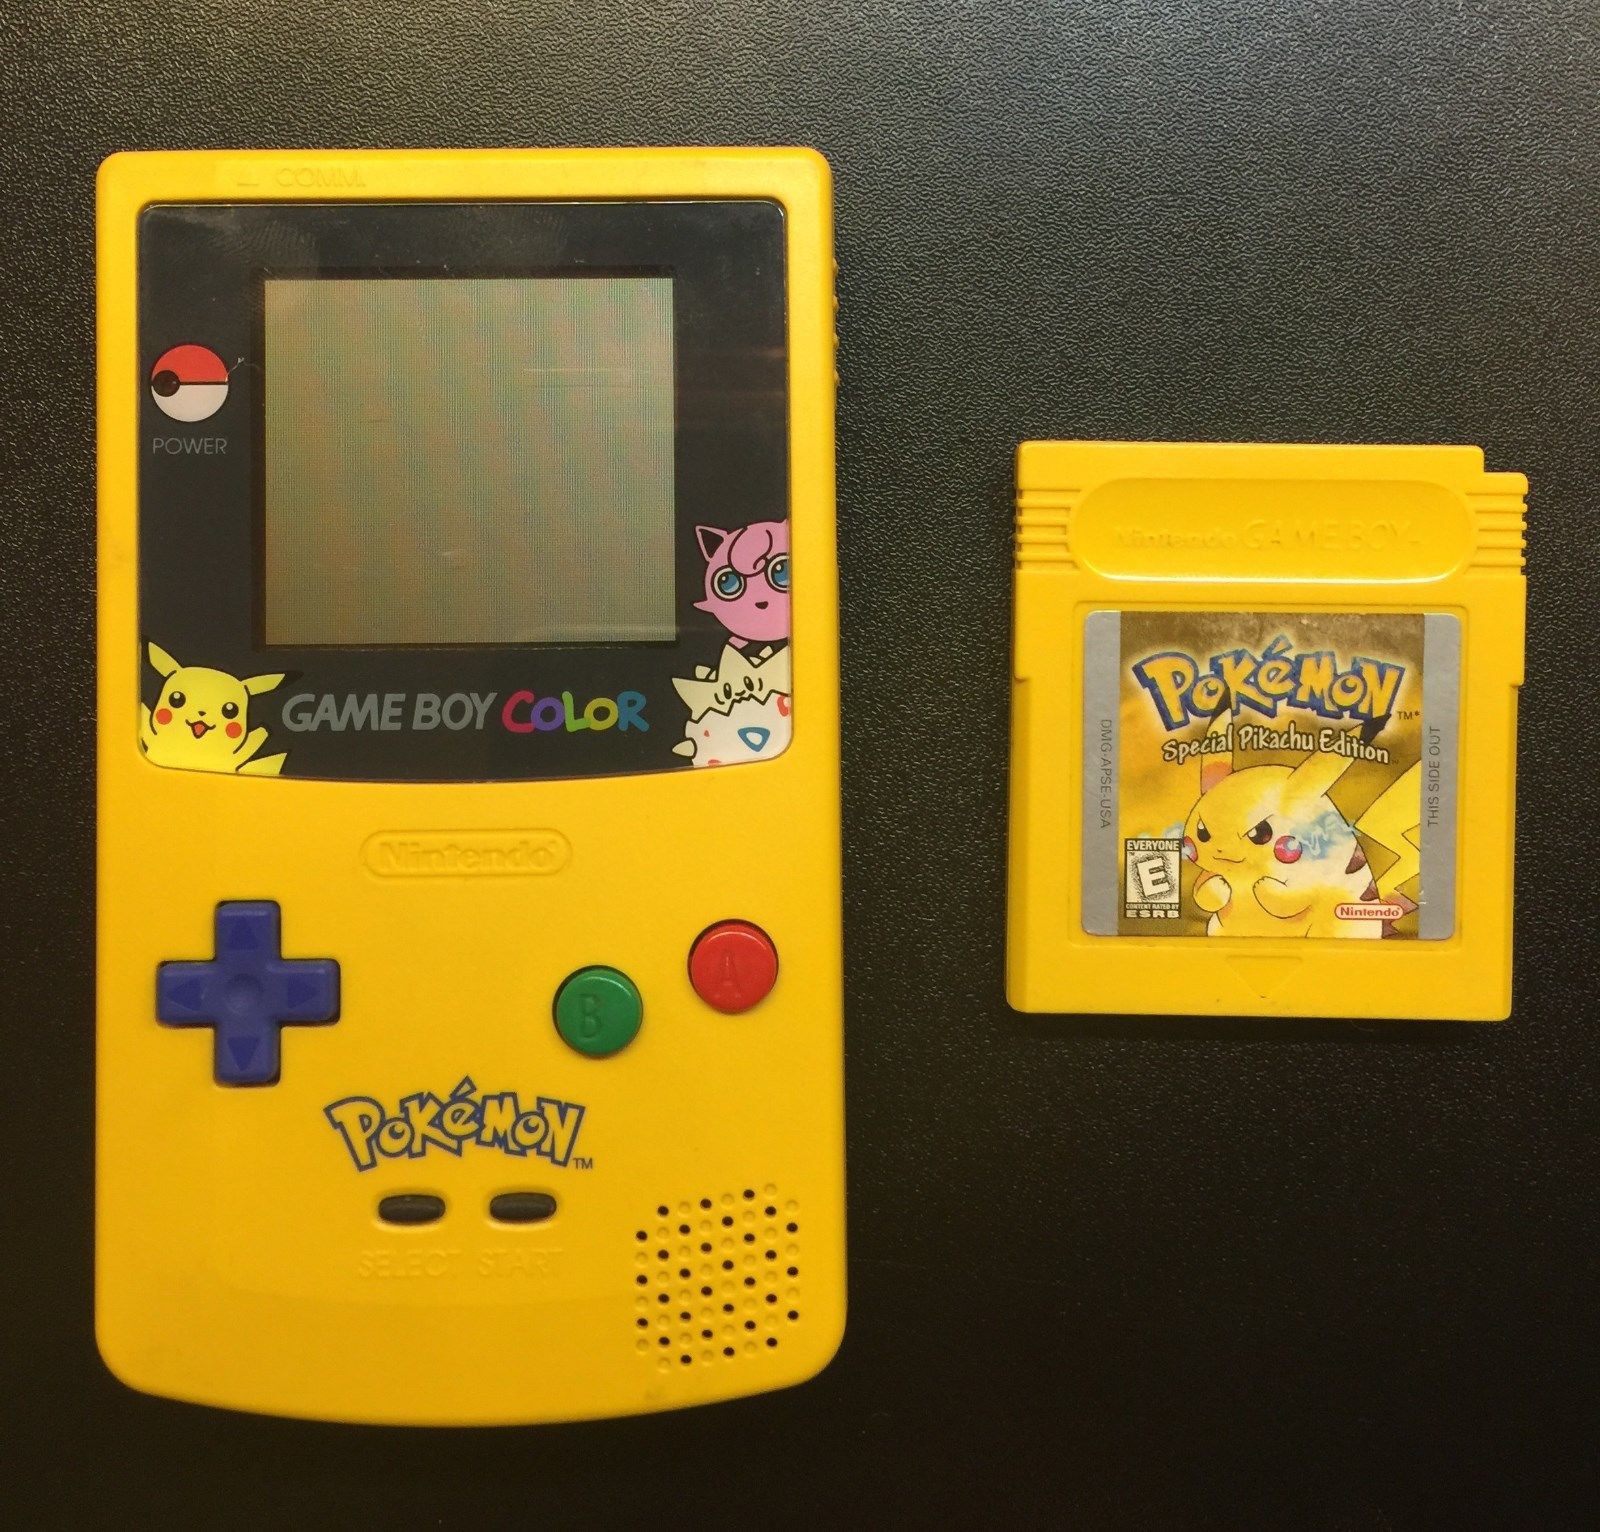 Colorful Gameboy Color Pokemon Yellow Cheats Sketch Coloring Page